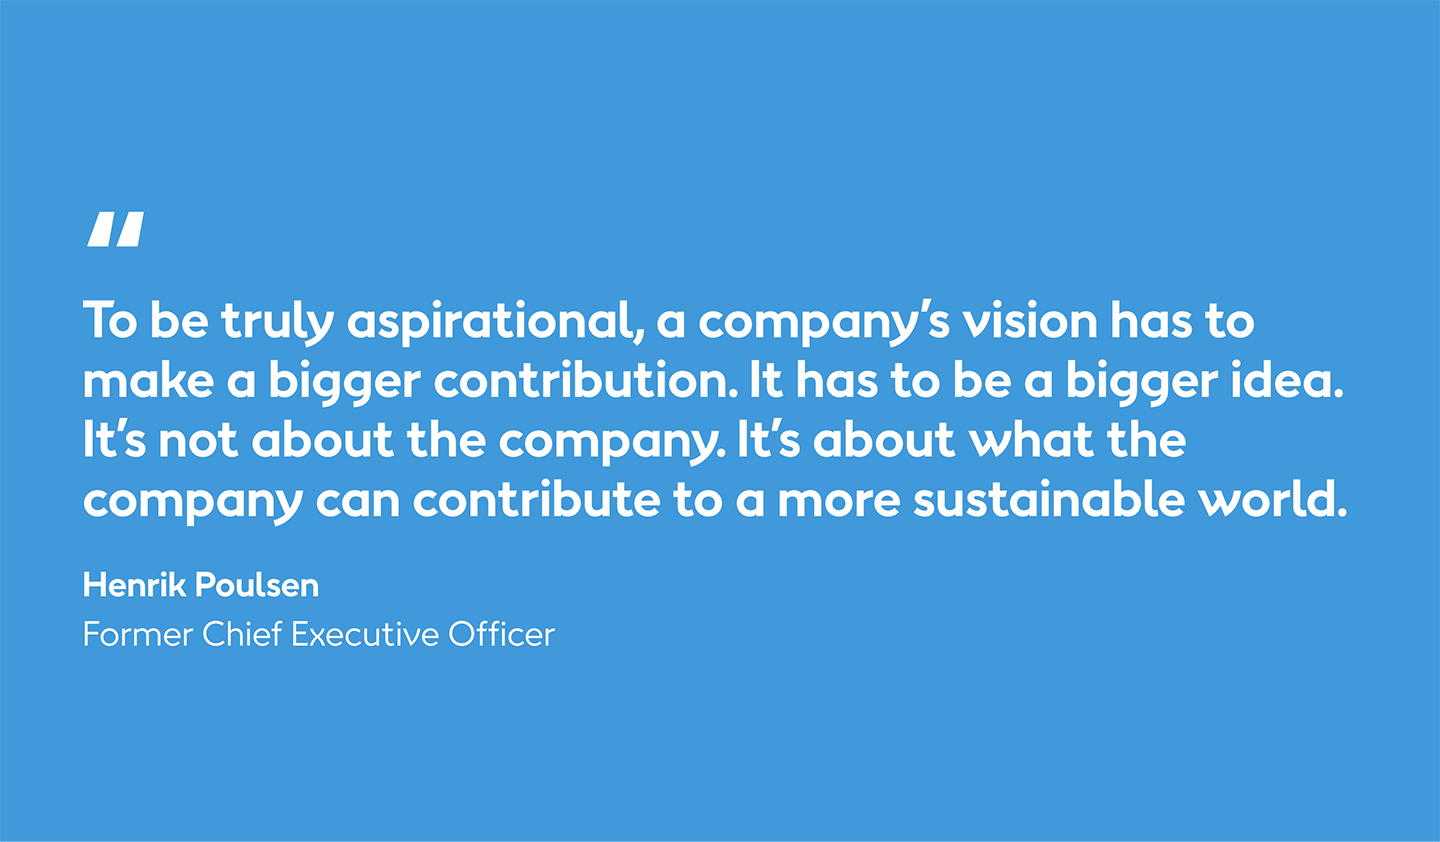 Former Ørsted CEO Henrik Poulsen is quoted saying that a company's vision must include creating a more sustainable world.